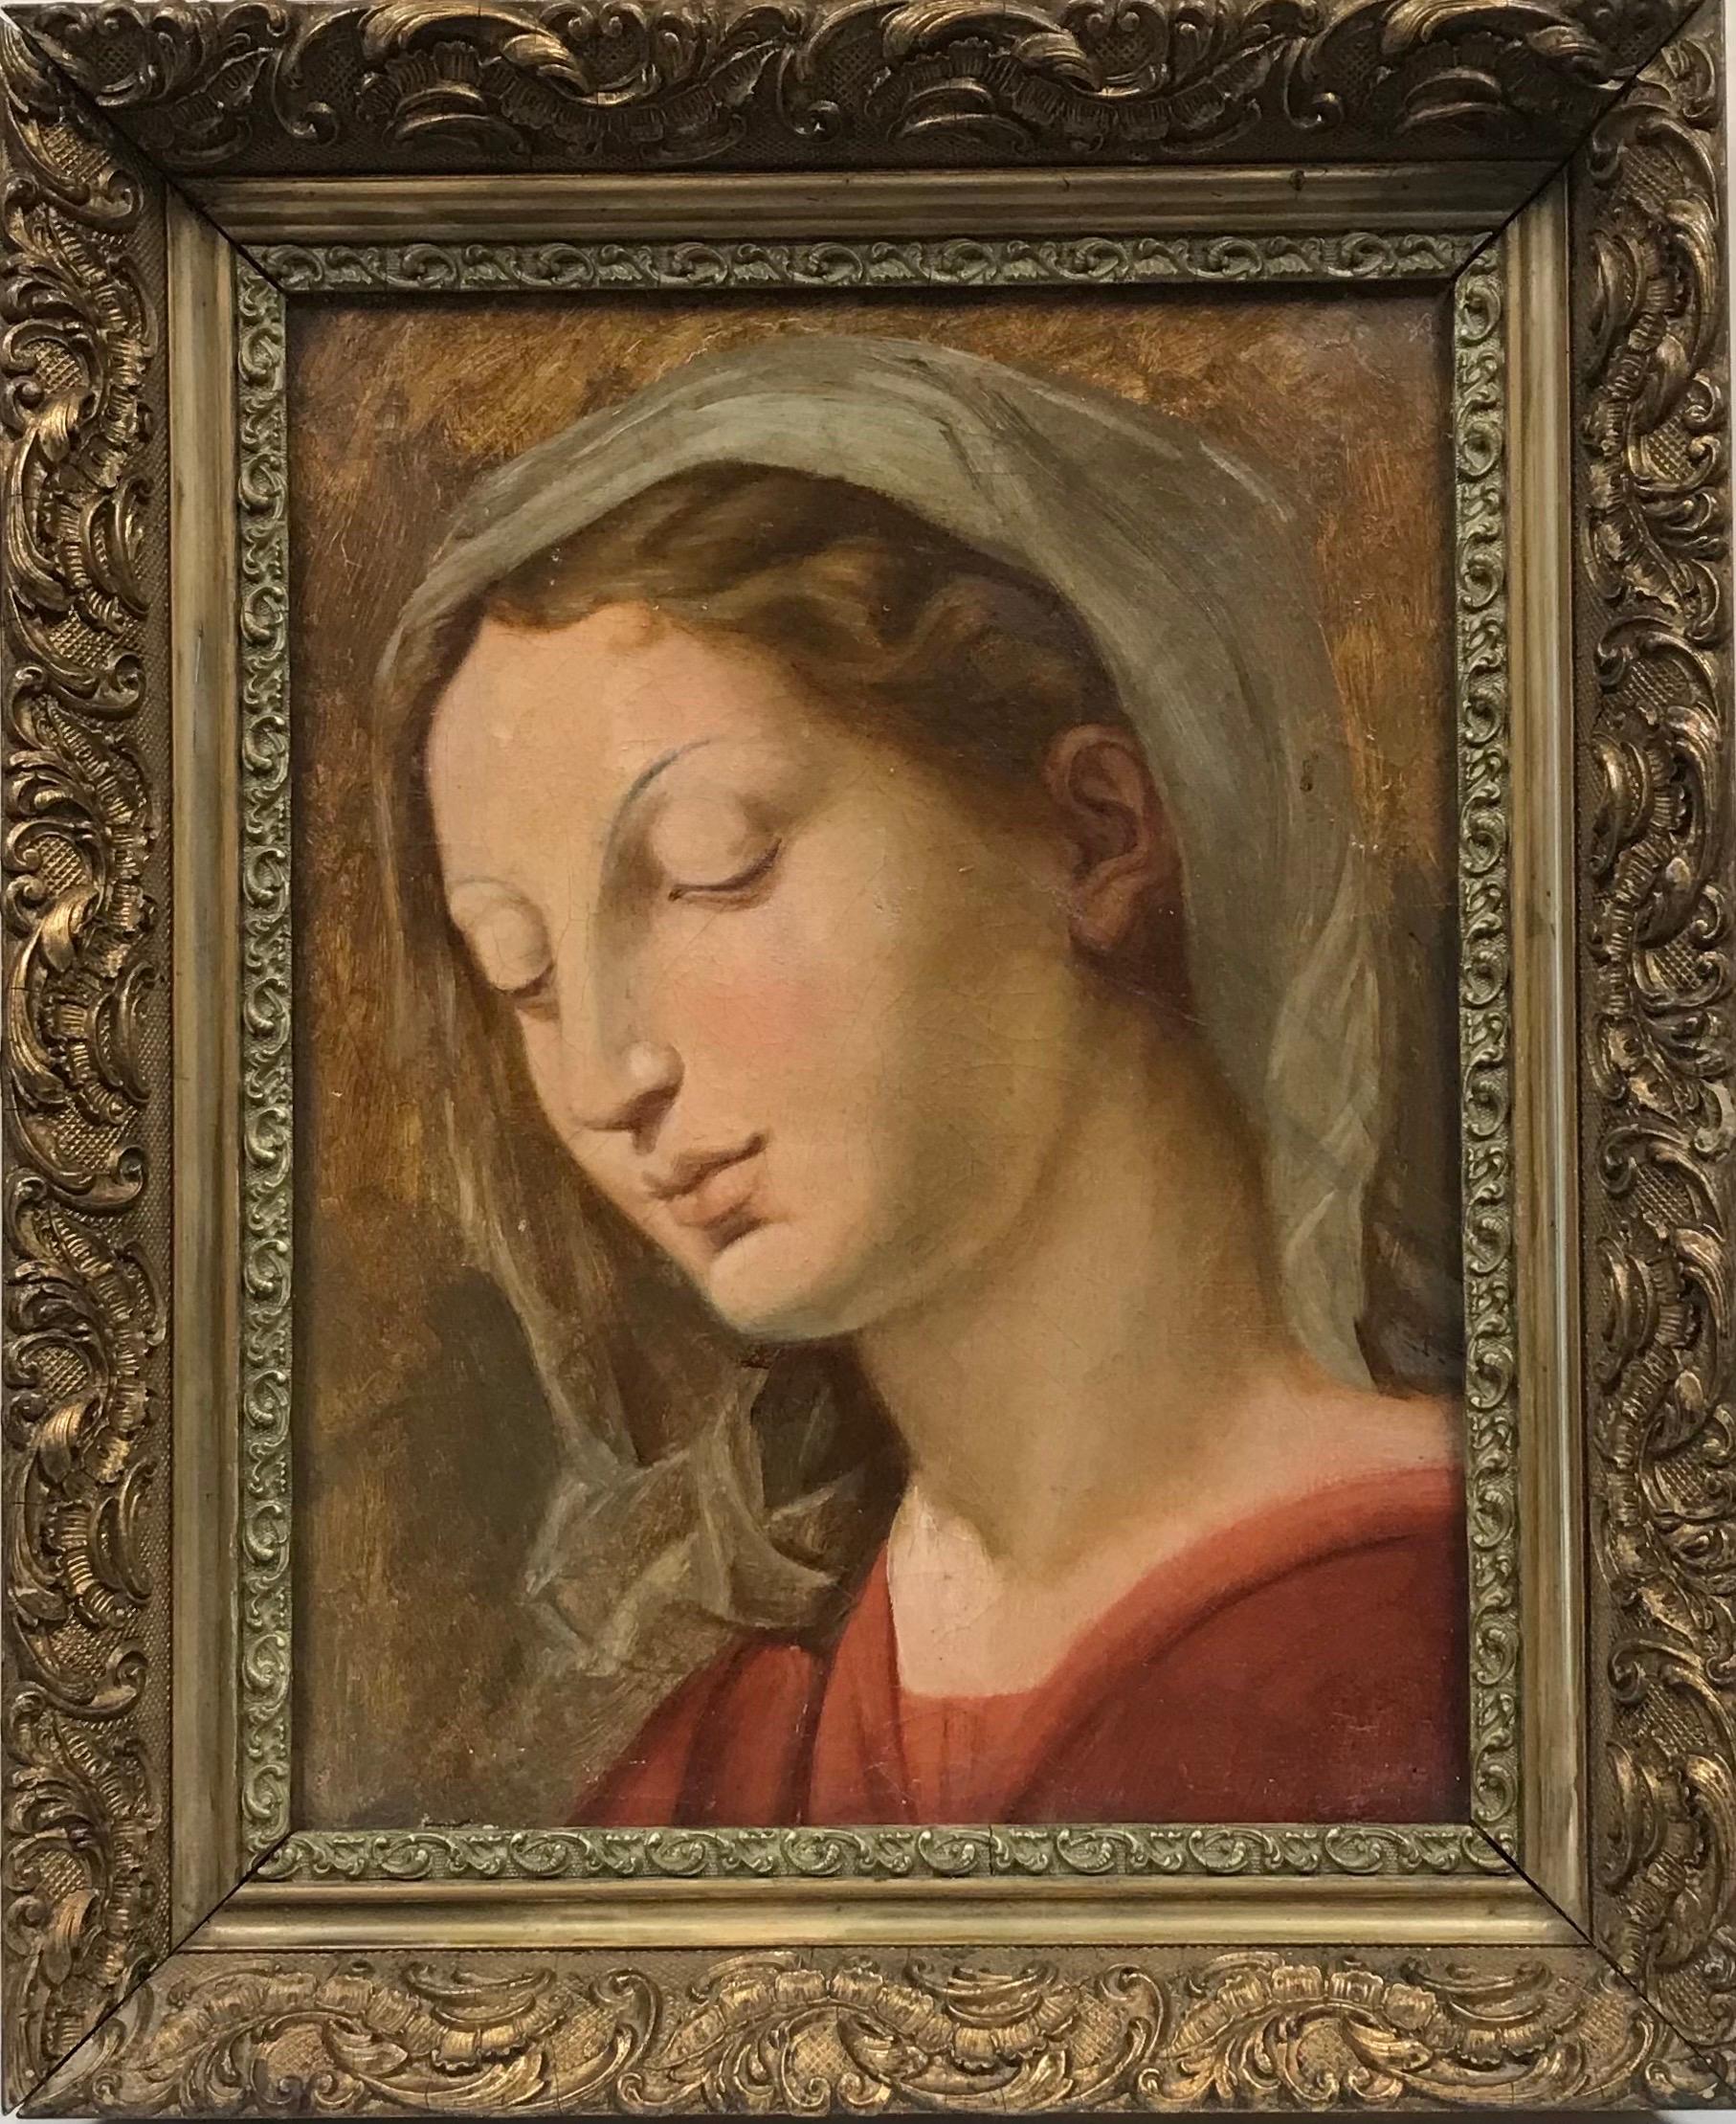 19th Century Italian School Figurative Painting - Beautiful Antique Original Oil Painting The Madonna in Contemplation, gilt frame